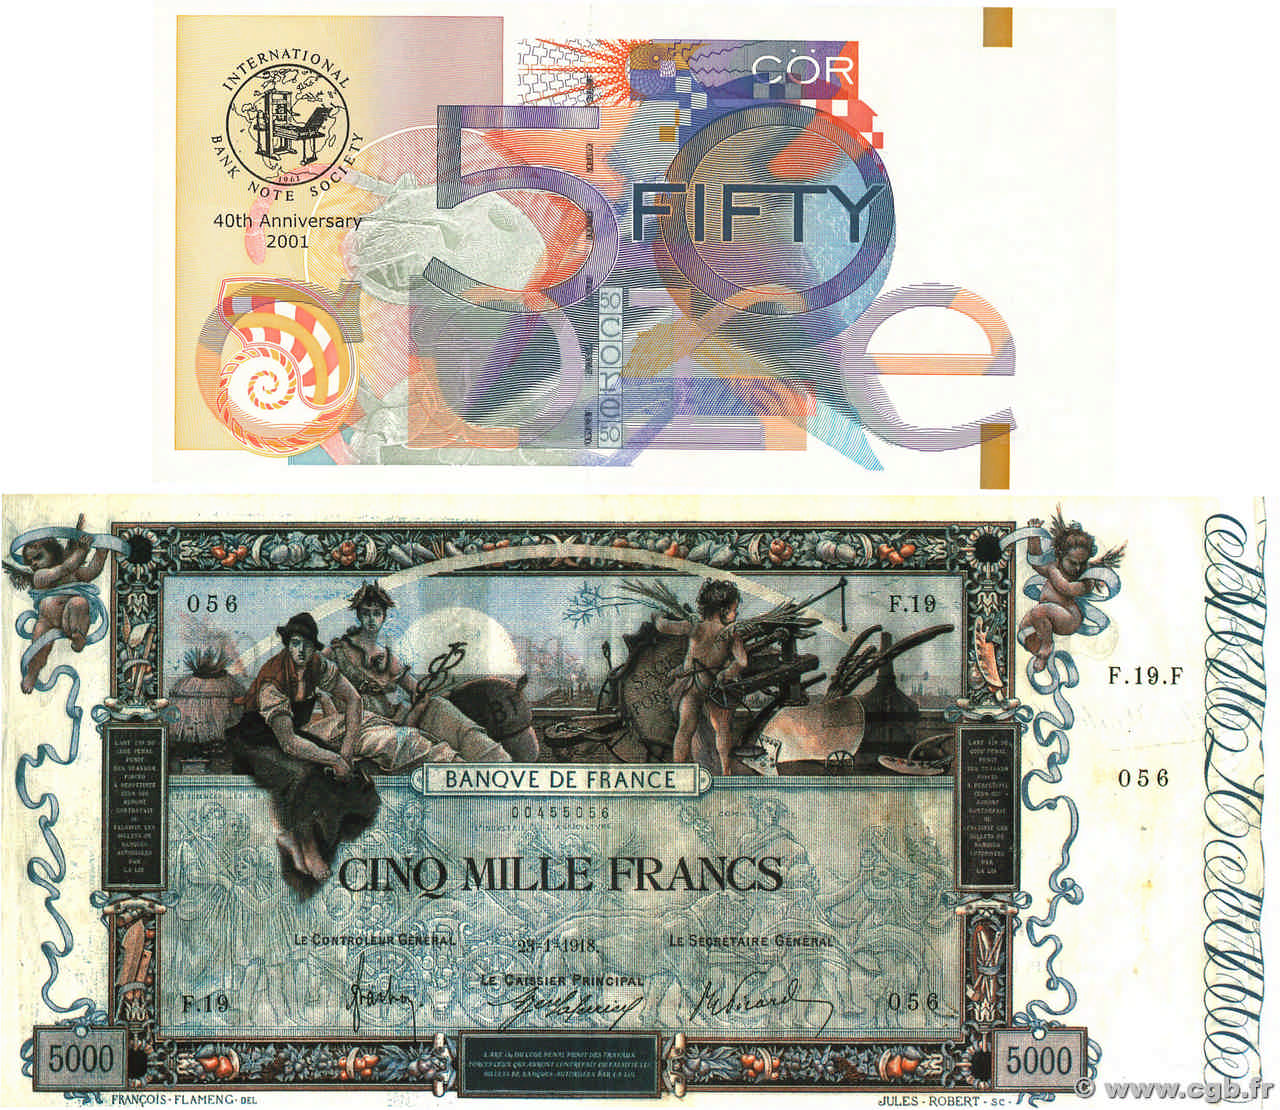 50 Pounds Test Note ENGLAND  2001  ST